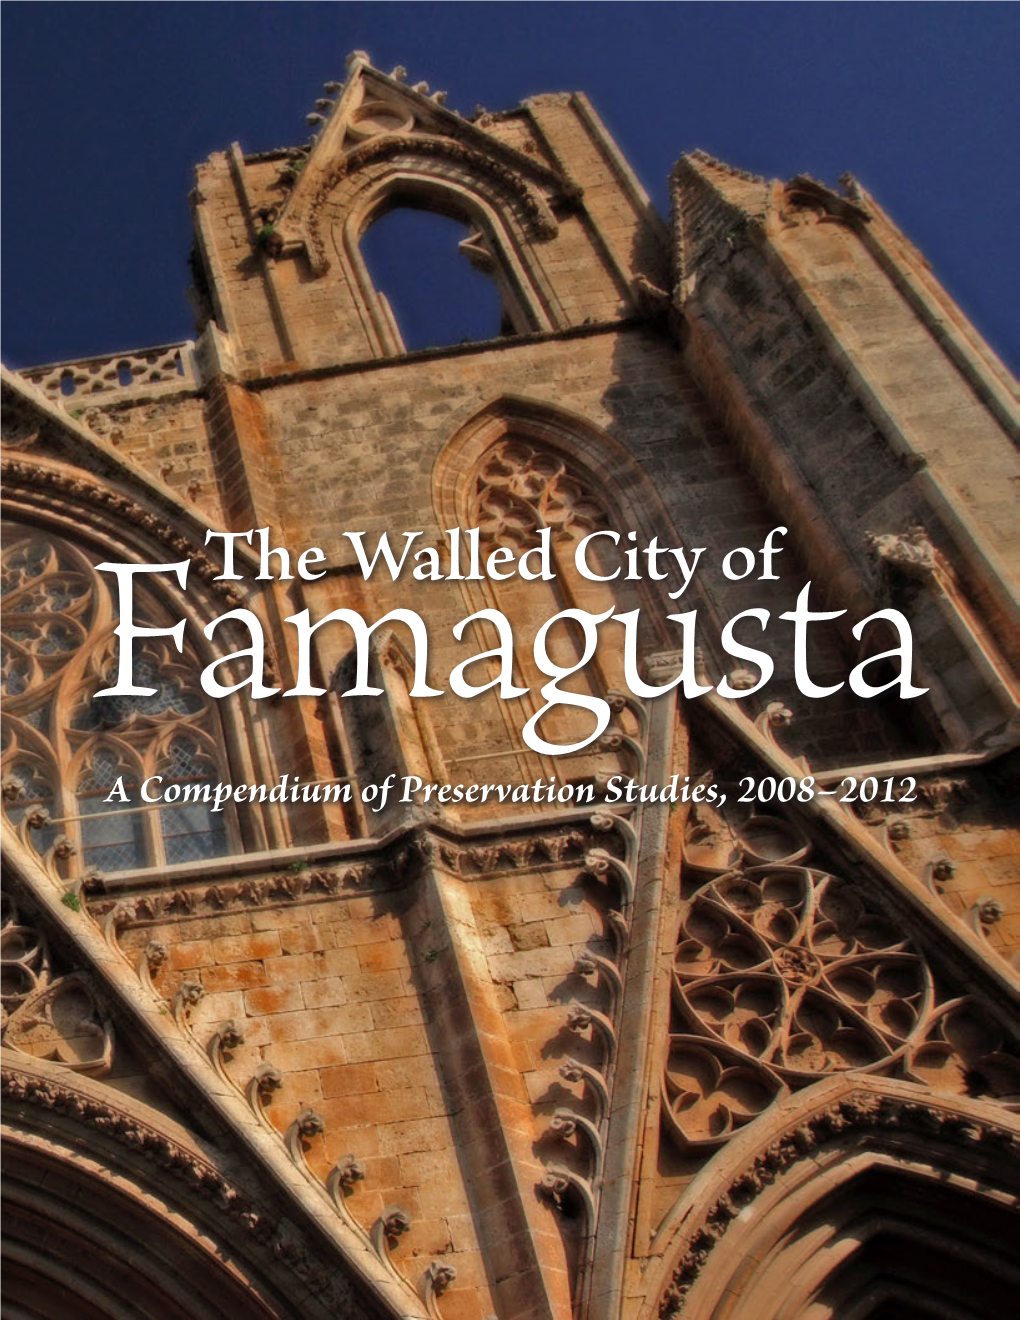 The Walled City of Famagusta: a Framework for Urban Conservation and Regeneration (2012) by Dr